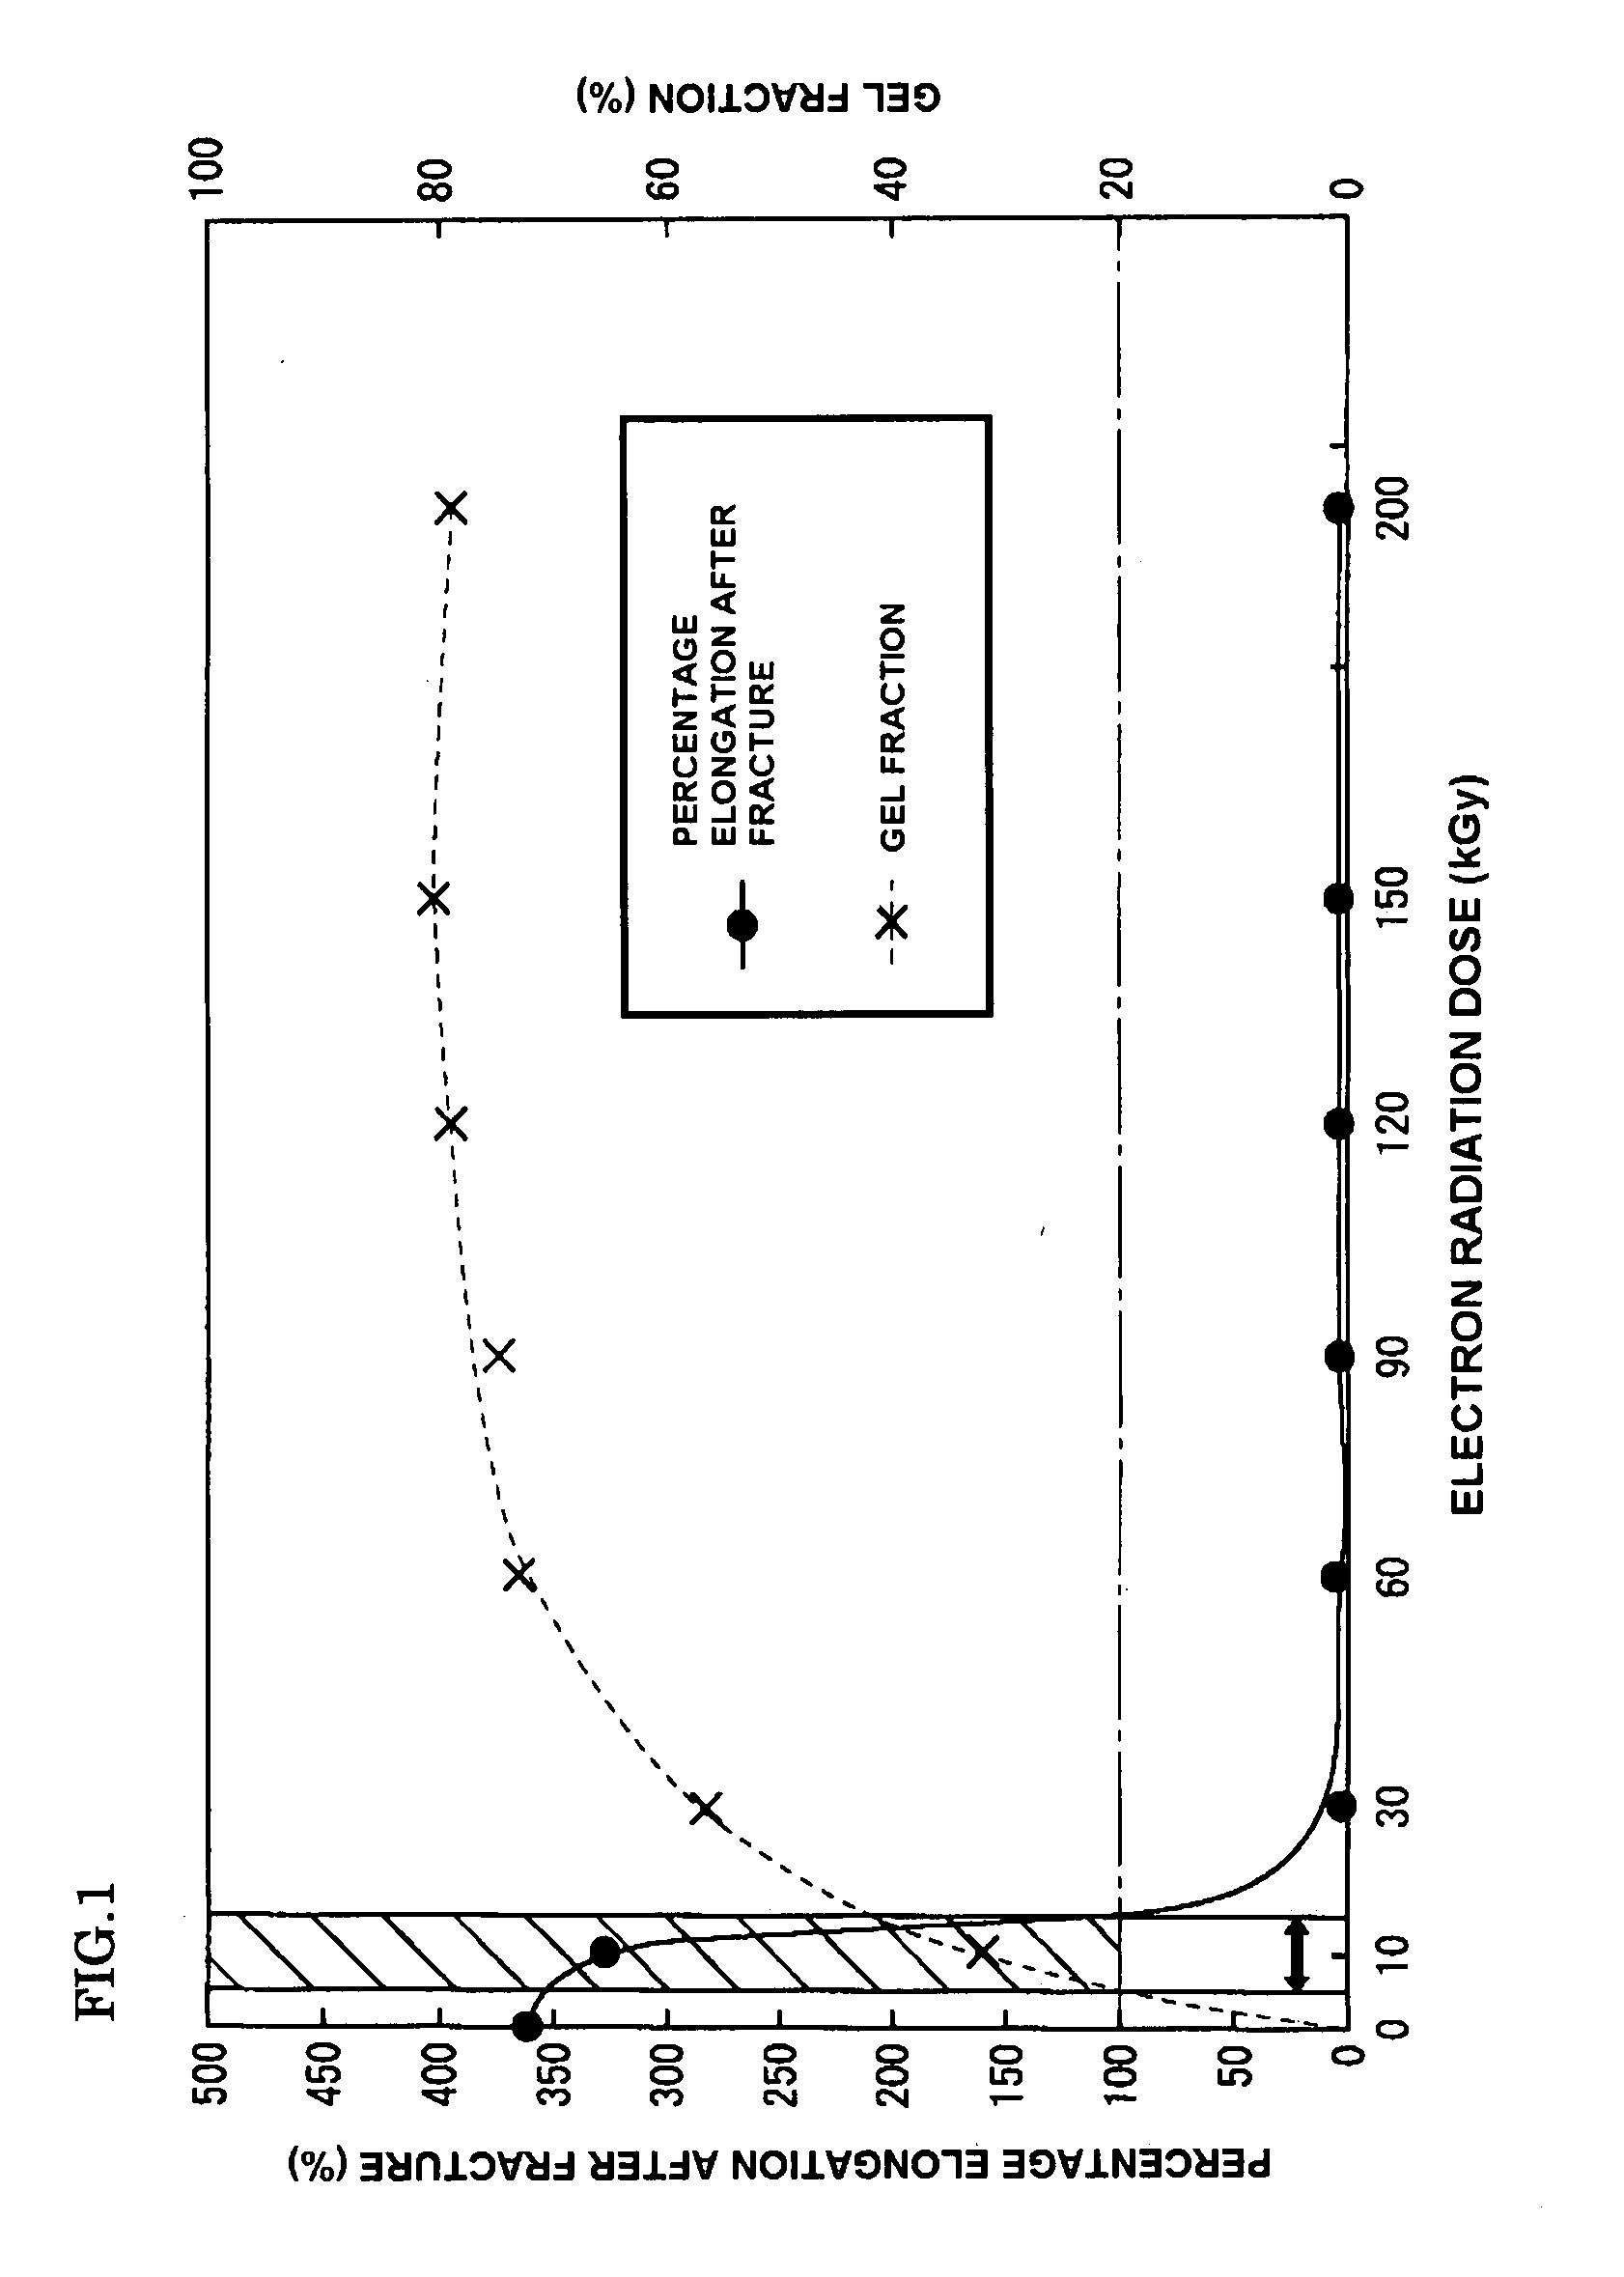 Process for Producing Cross-Linked Material of Polylactic Acid and Cross-Linked Material of Polylactic Acid